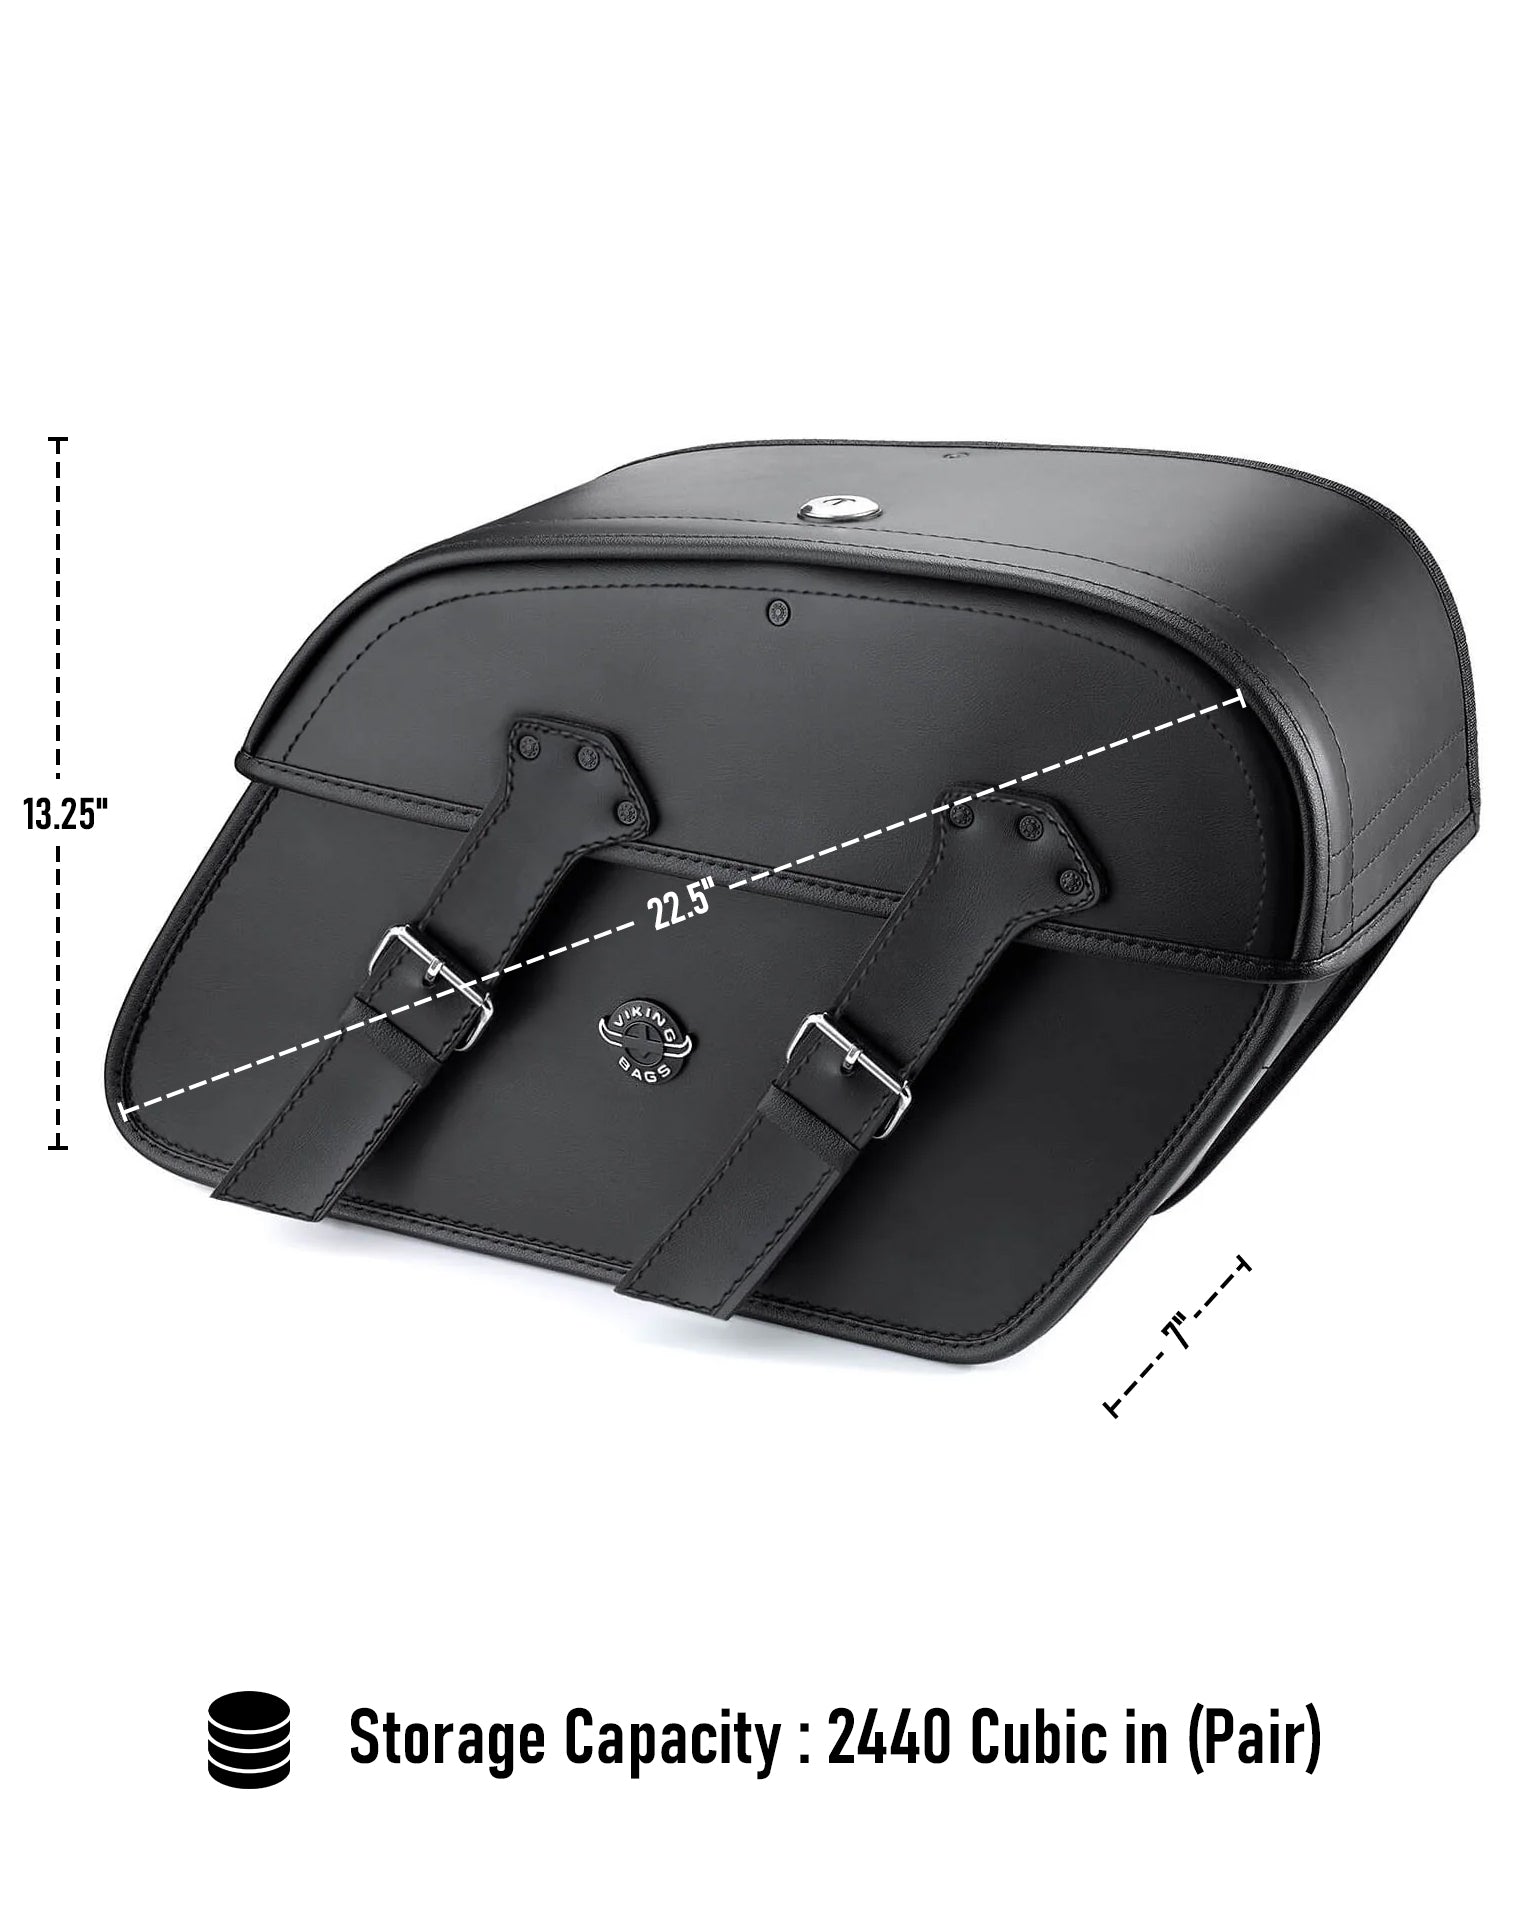 Viking Raven Extra Large Yamaha V Star 1100 Classic Xvs11A Leather Motorcycle Saddlebags Can Store Your Ridings Gears